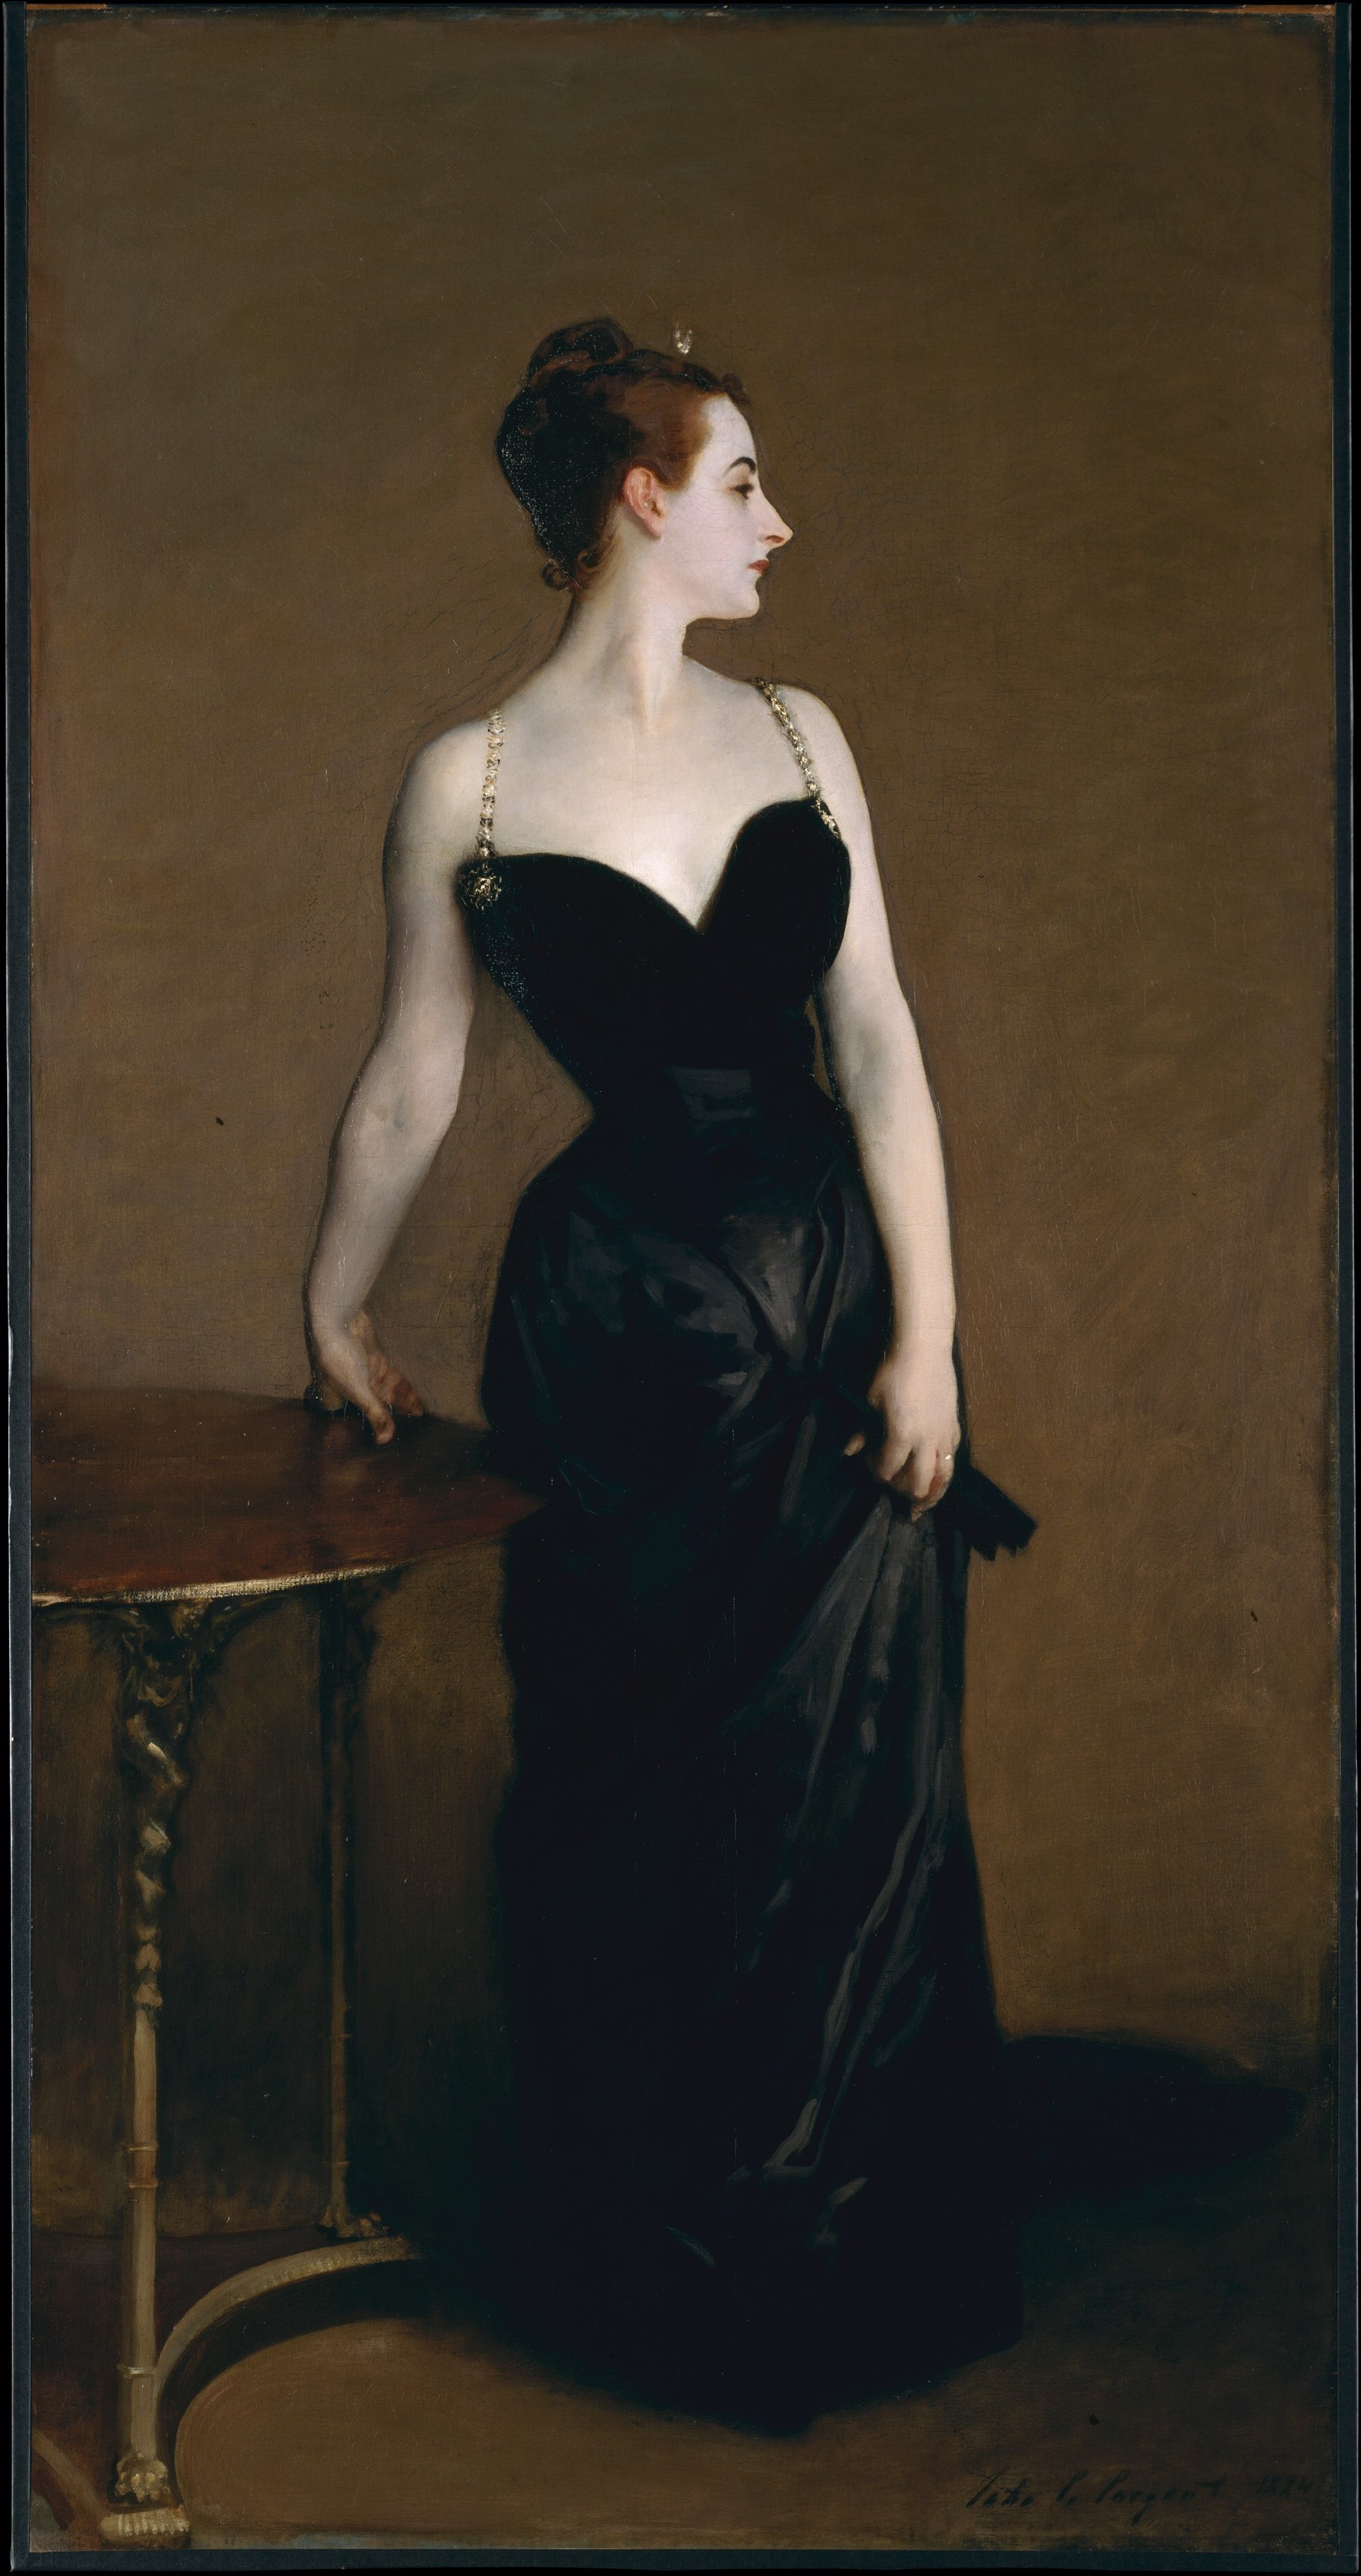 Madam X by John Singer Sargent {Image from The Met Public Access}